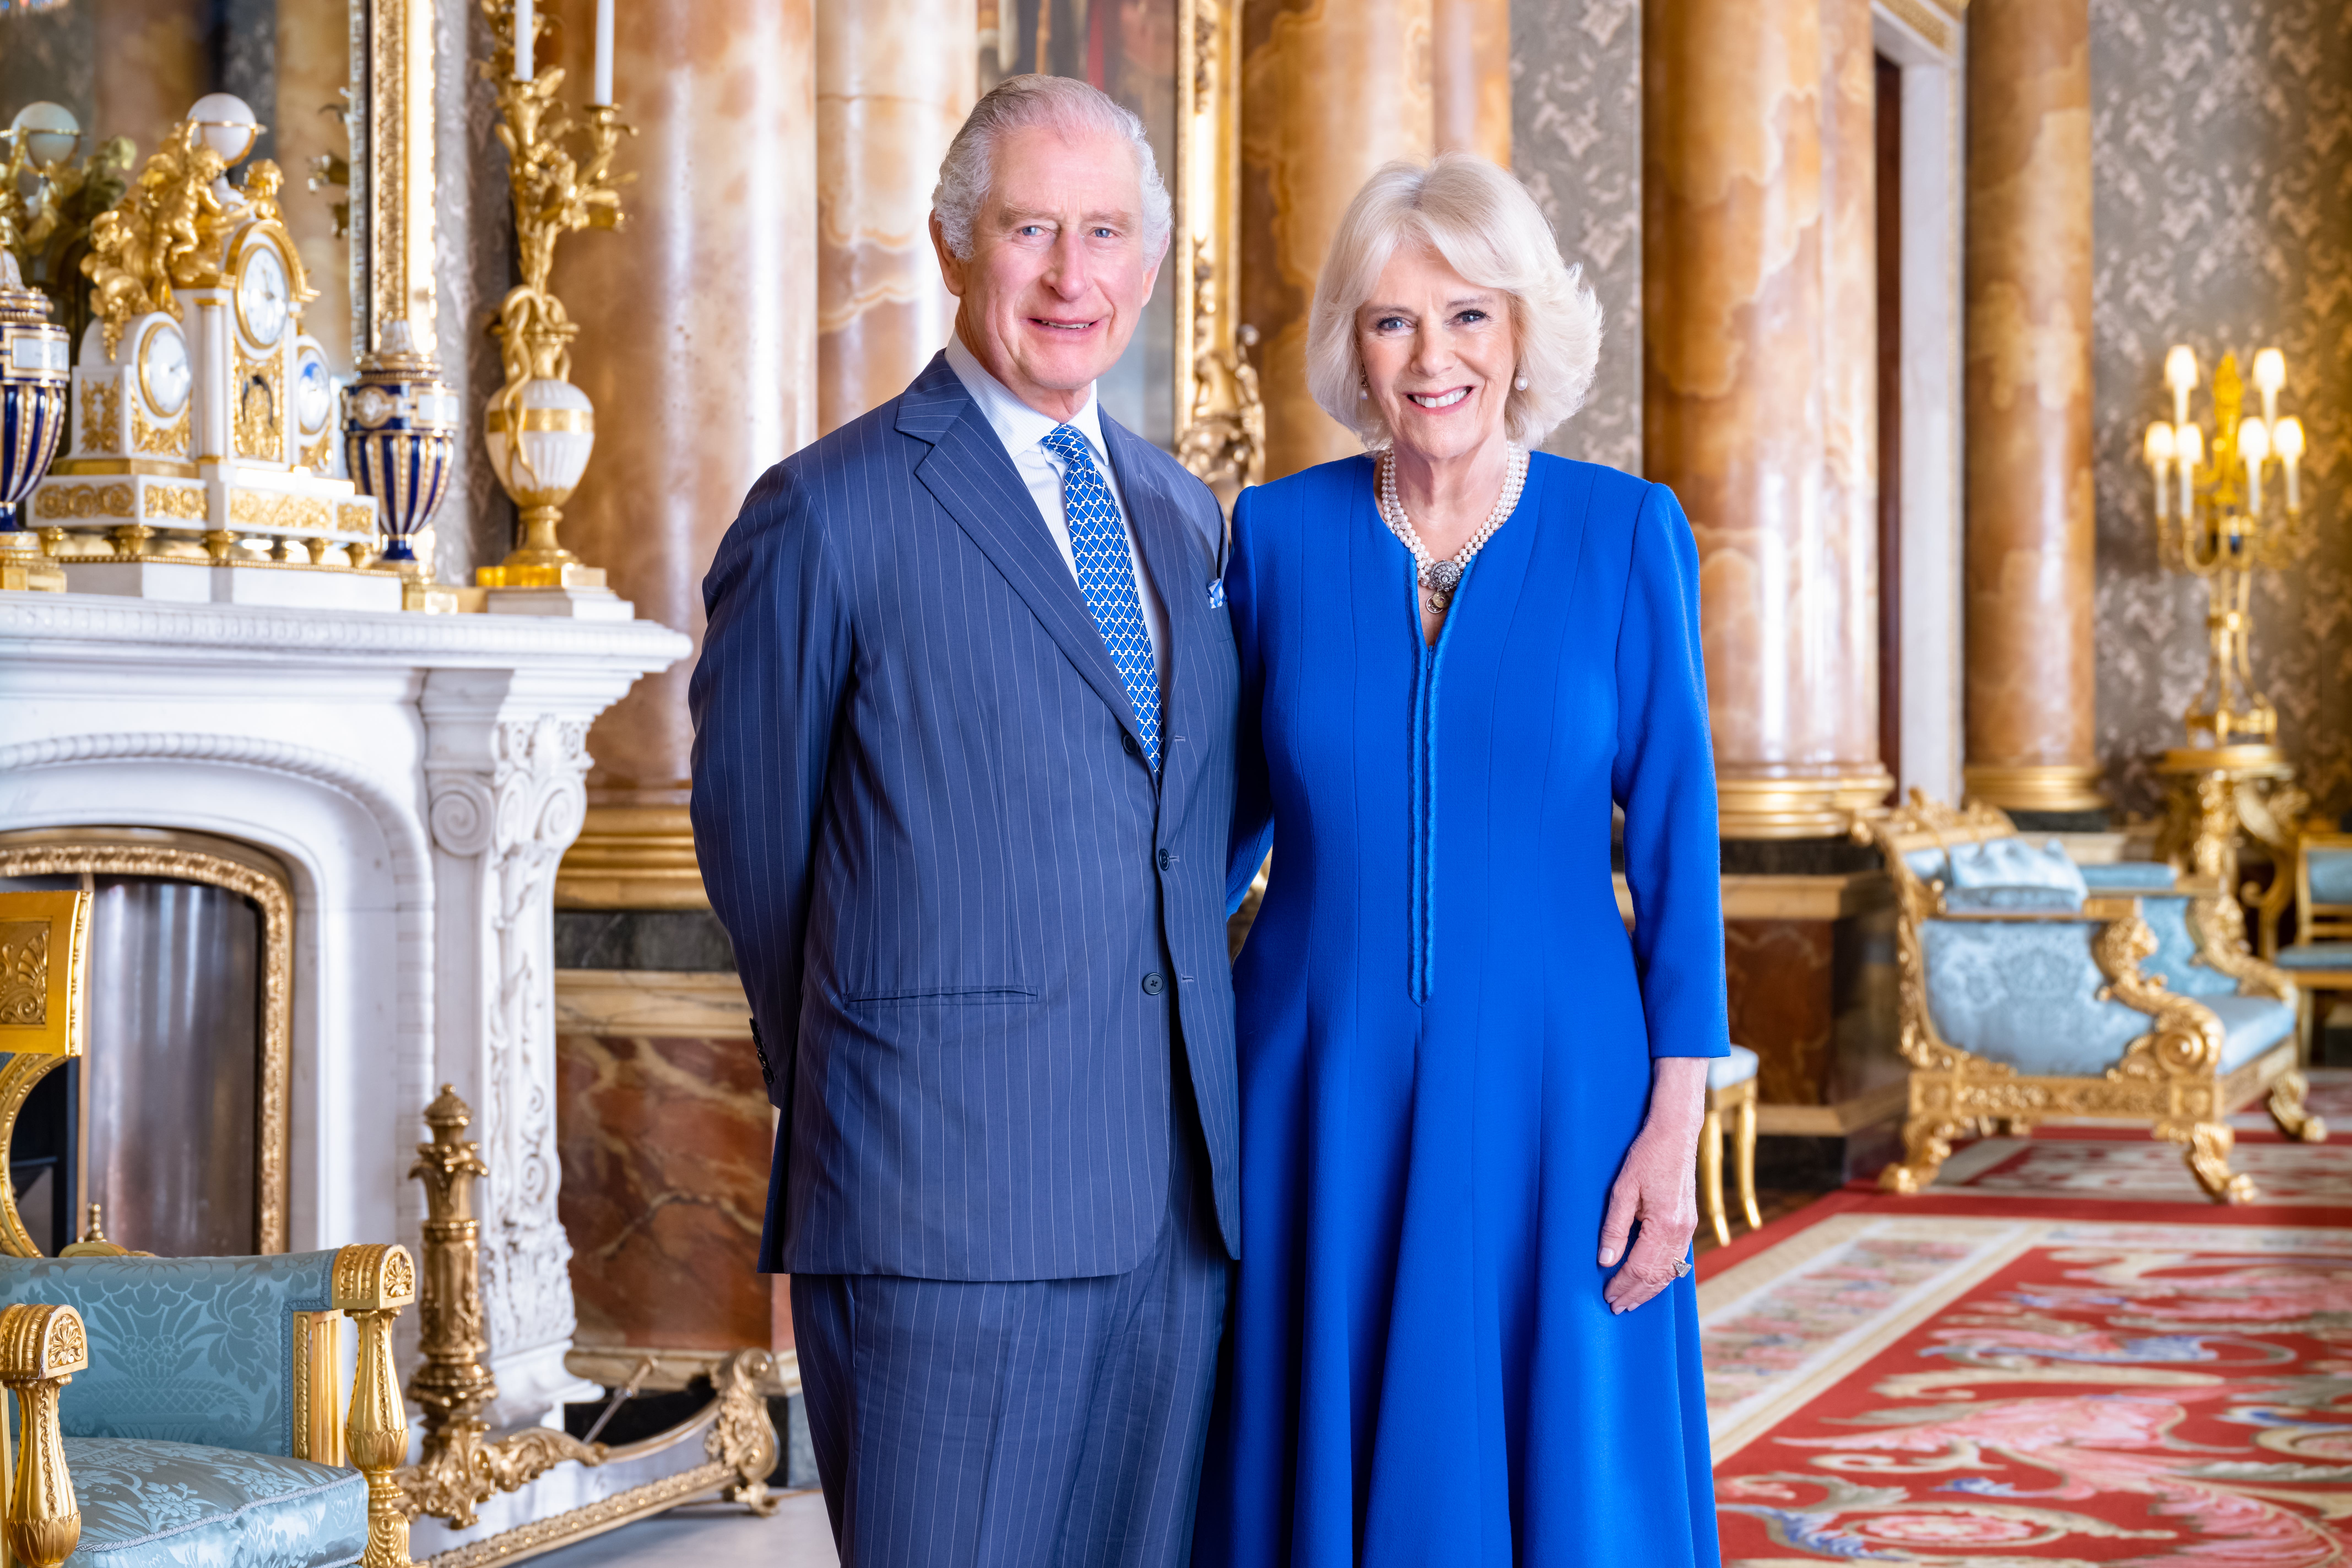 A portrait of the King and Queen Consort taken last month by Hugo Burnand